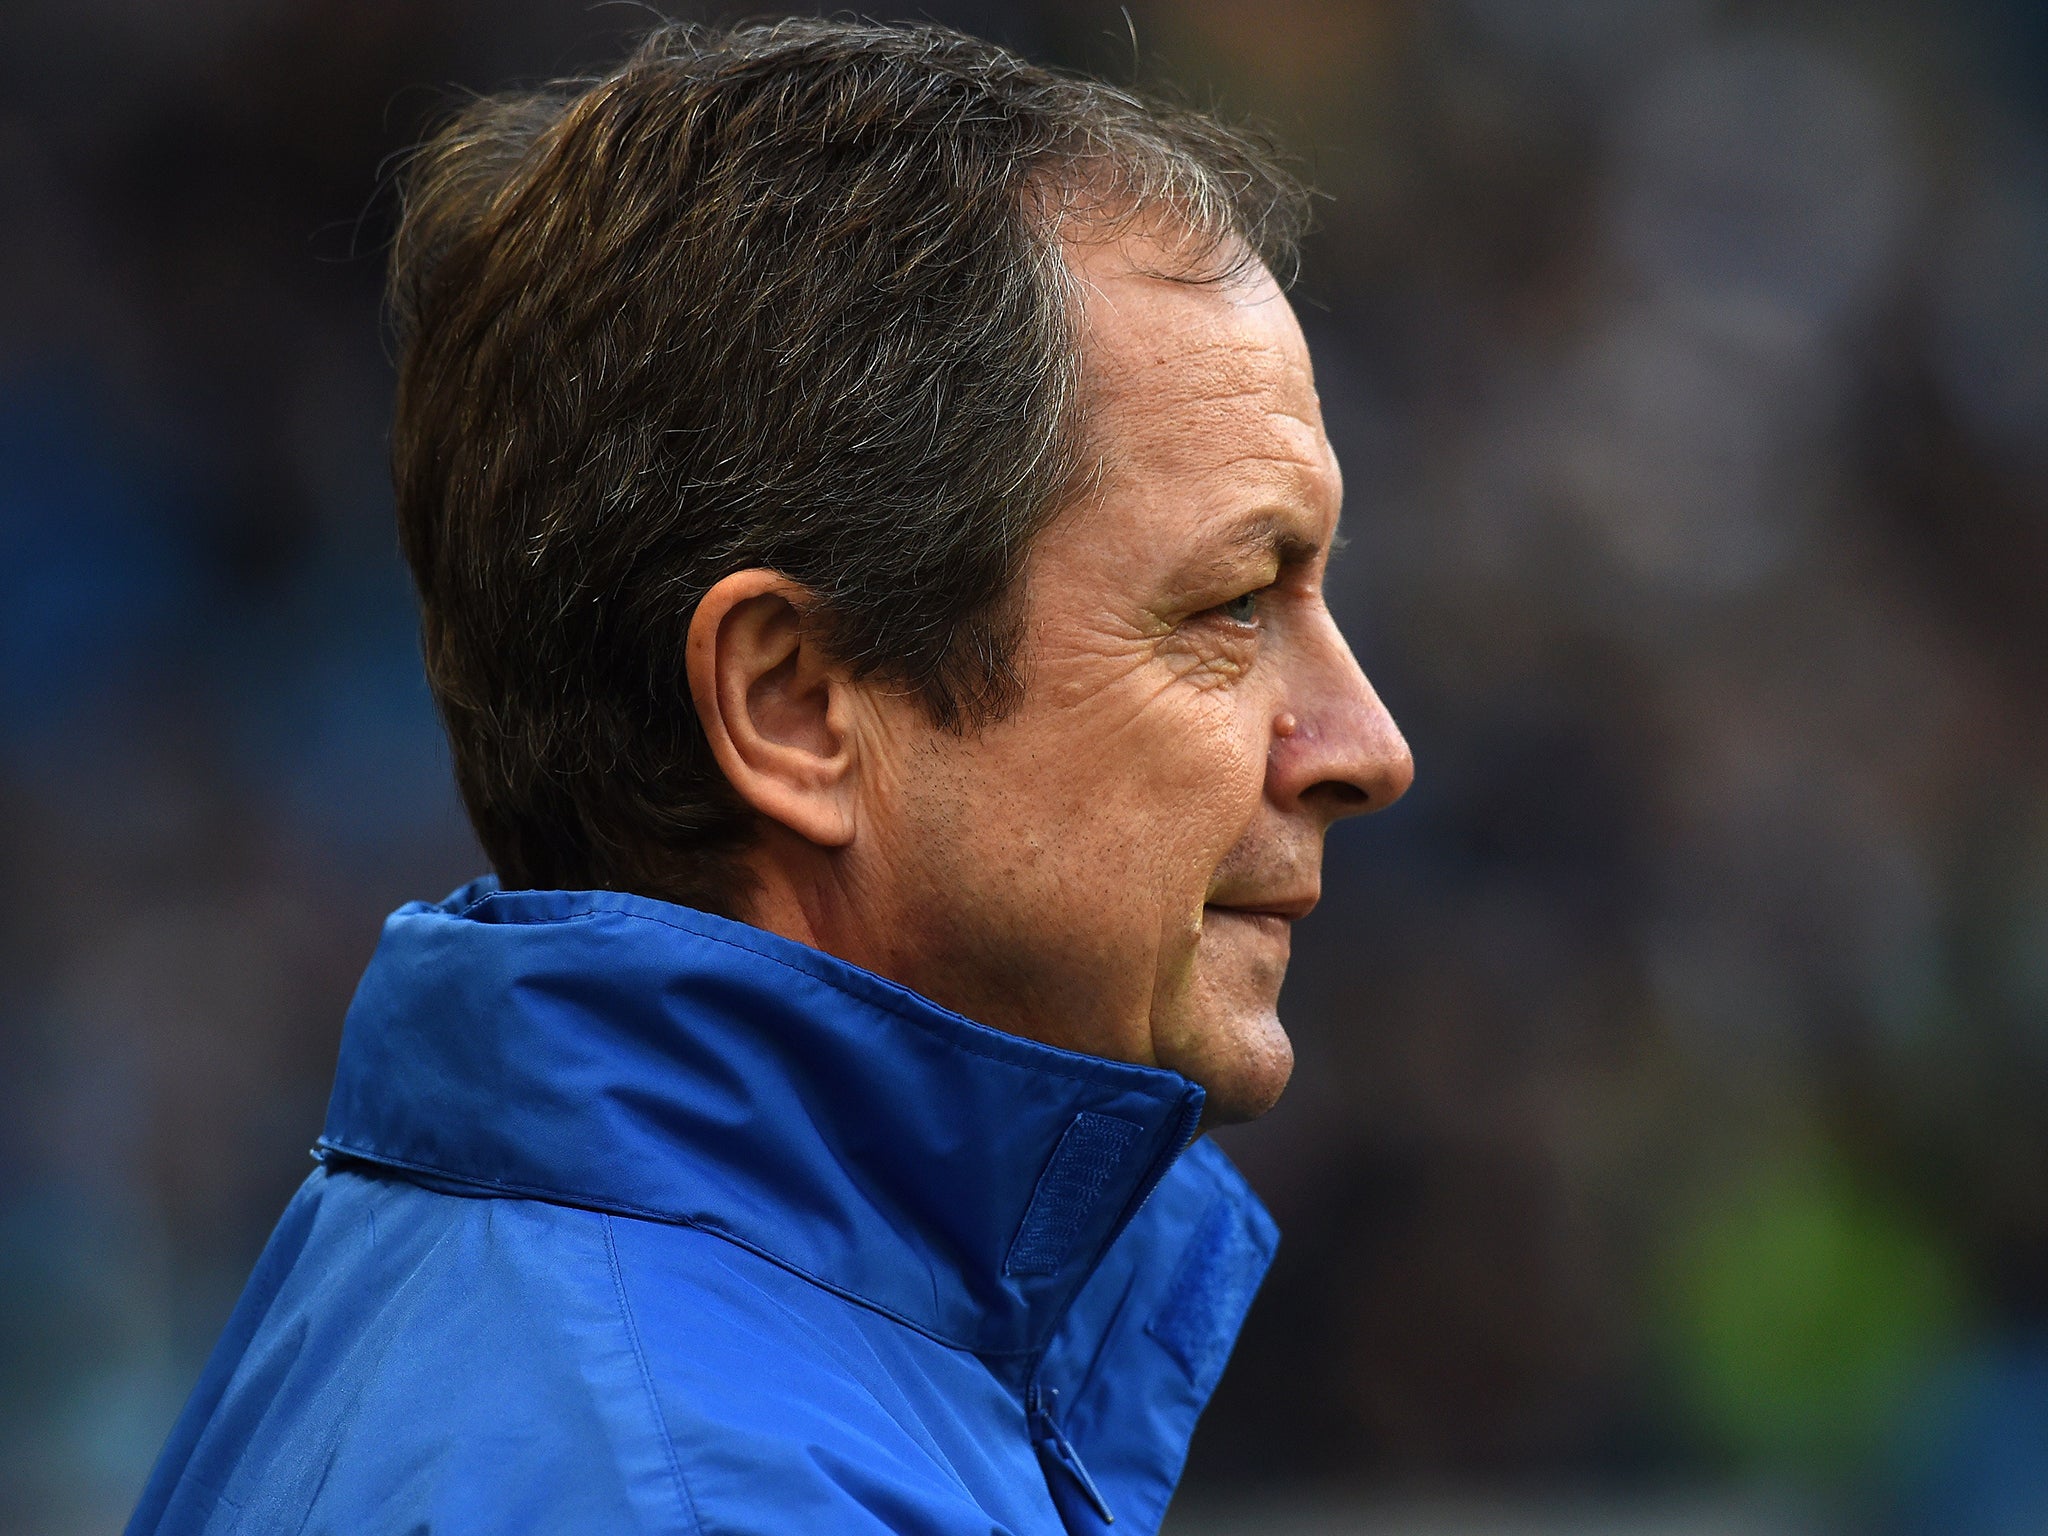 Sheffield Wednesday manager Stuart Gray has been tasked by new owner Dejphon Chansiri to get the team back into the Premier League by 2017